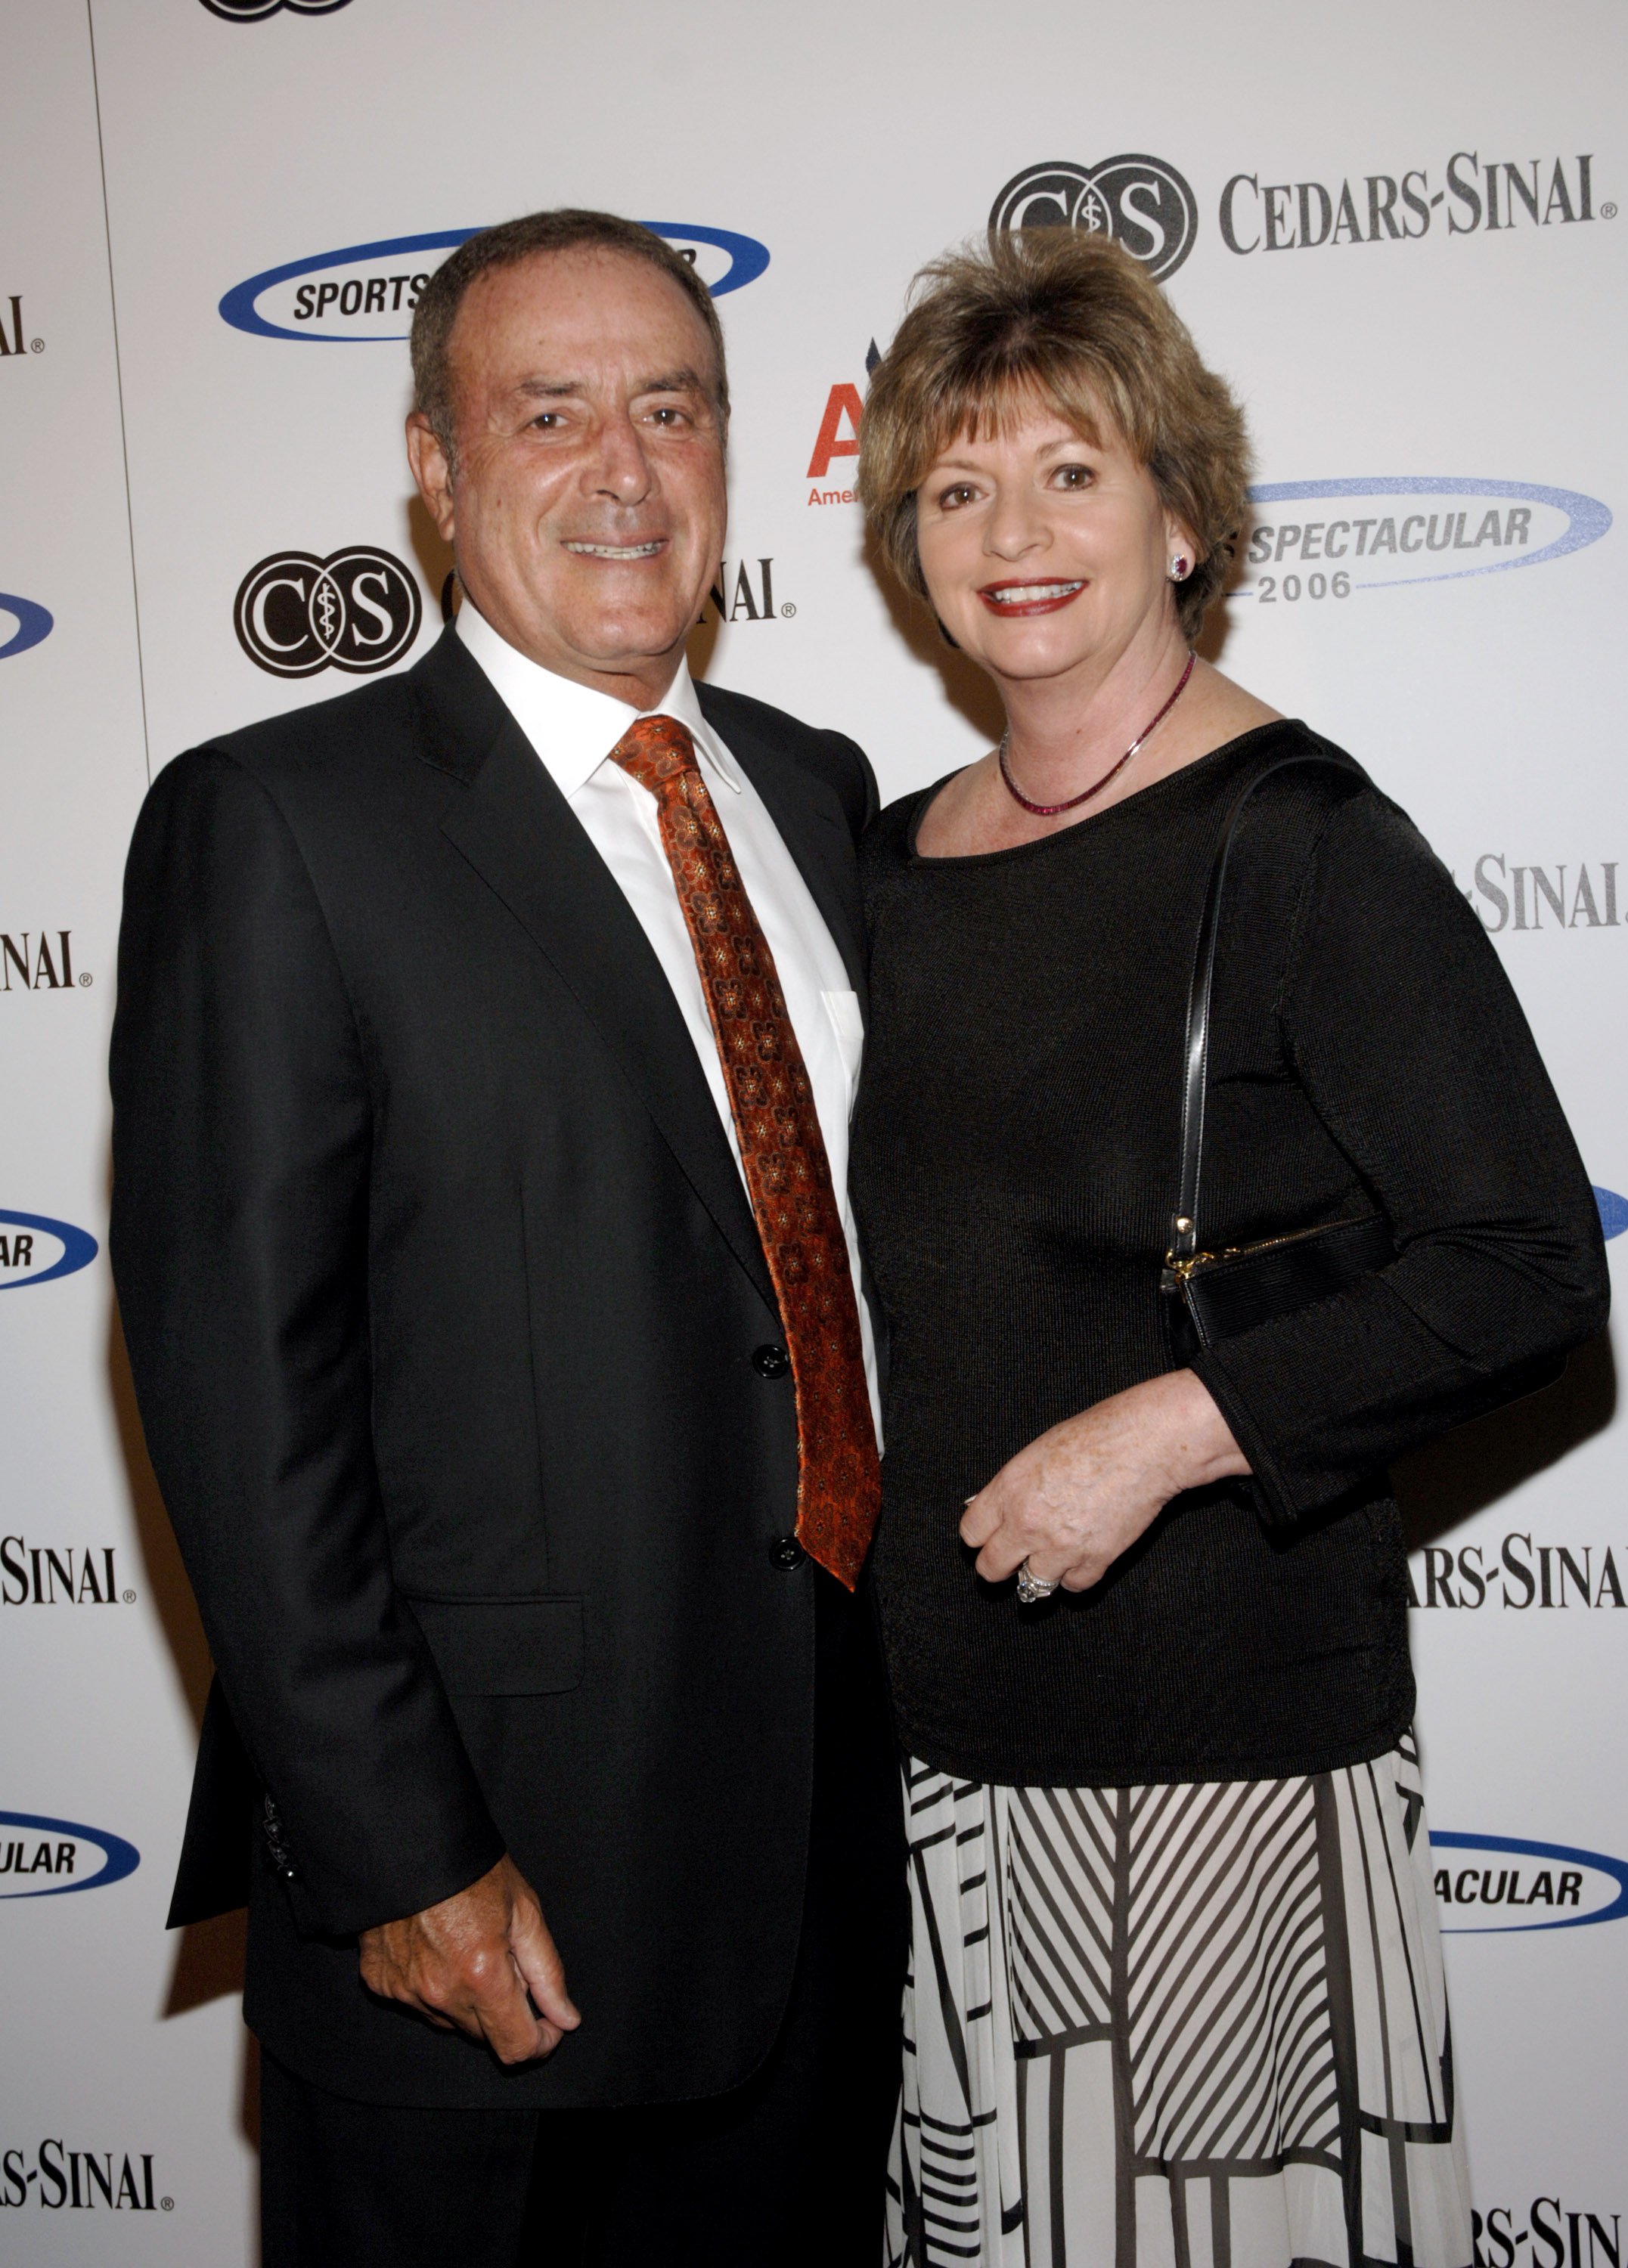 Al Michaels and Linda Michaels during the Cedars-Sinai Medical Center's 21st Annual Sports Spectacular at the Hyatt Regency Century Plaza Hotel in Century City, CA. | Source: Getty Images